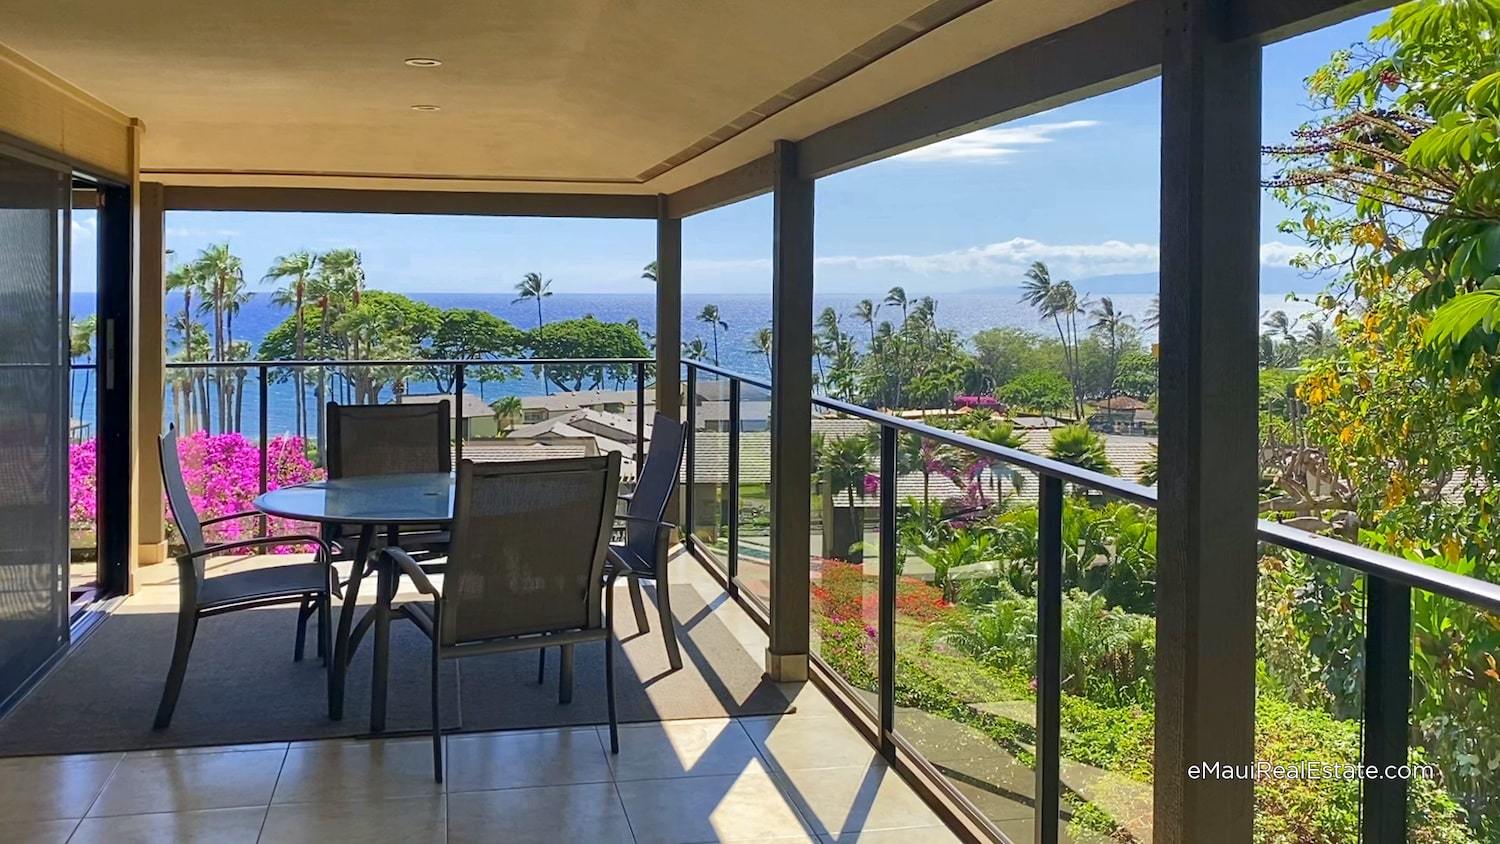 Large wrap-around lanai spaces are one of the great features of the condos at Wailea Elua Village